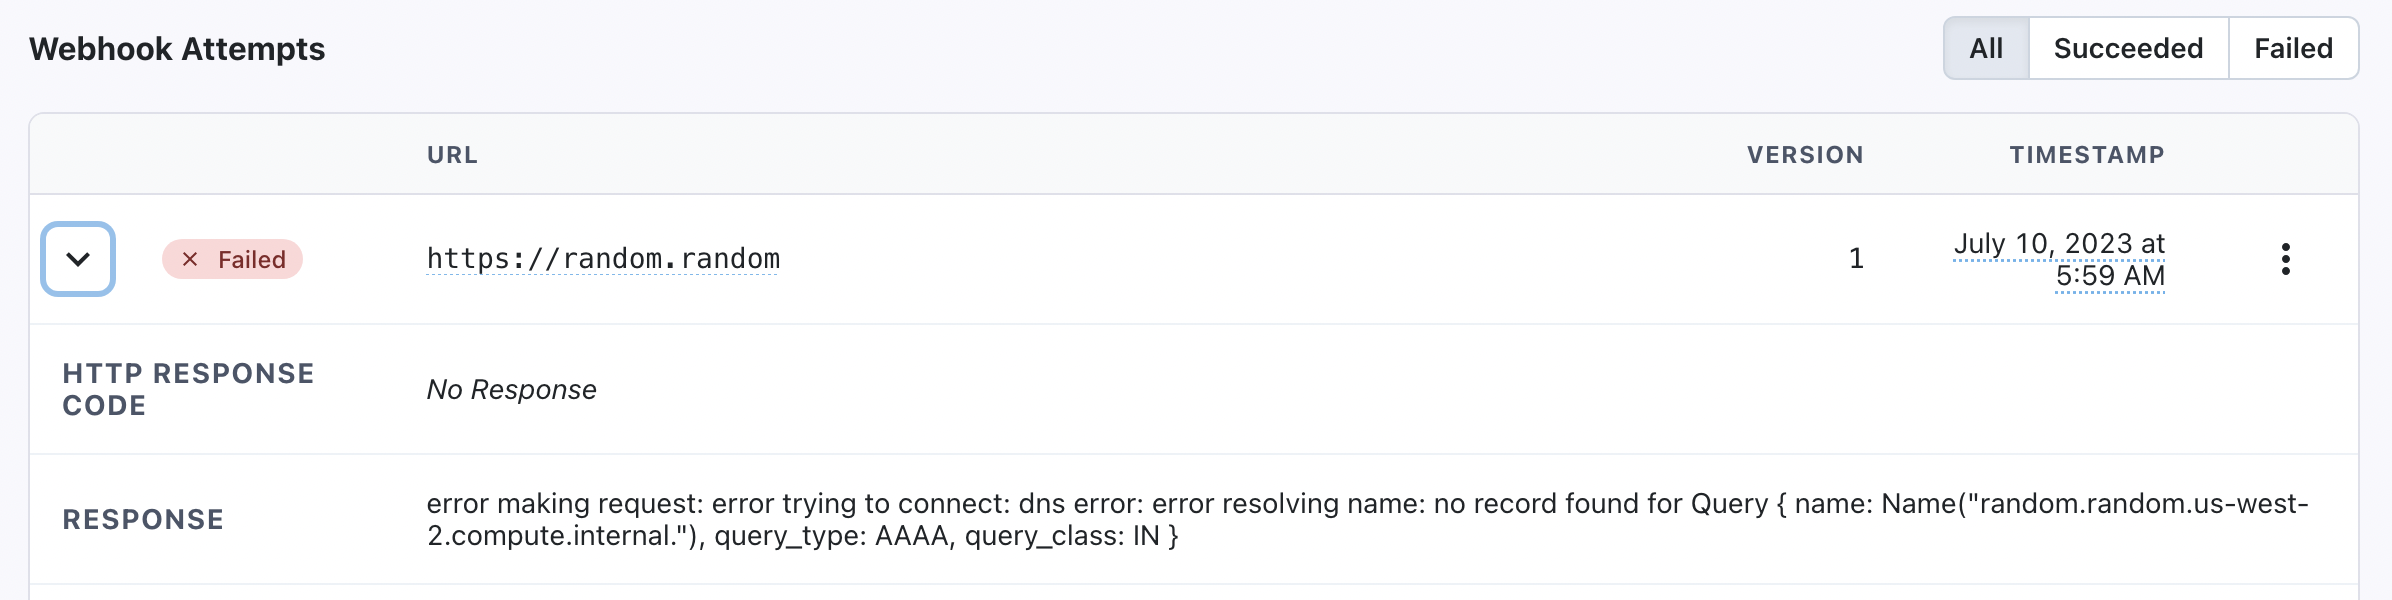 Example of a Failed Webhook Attempt's Response